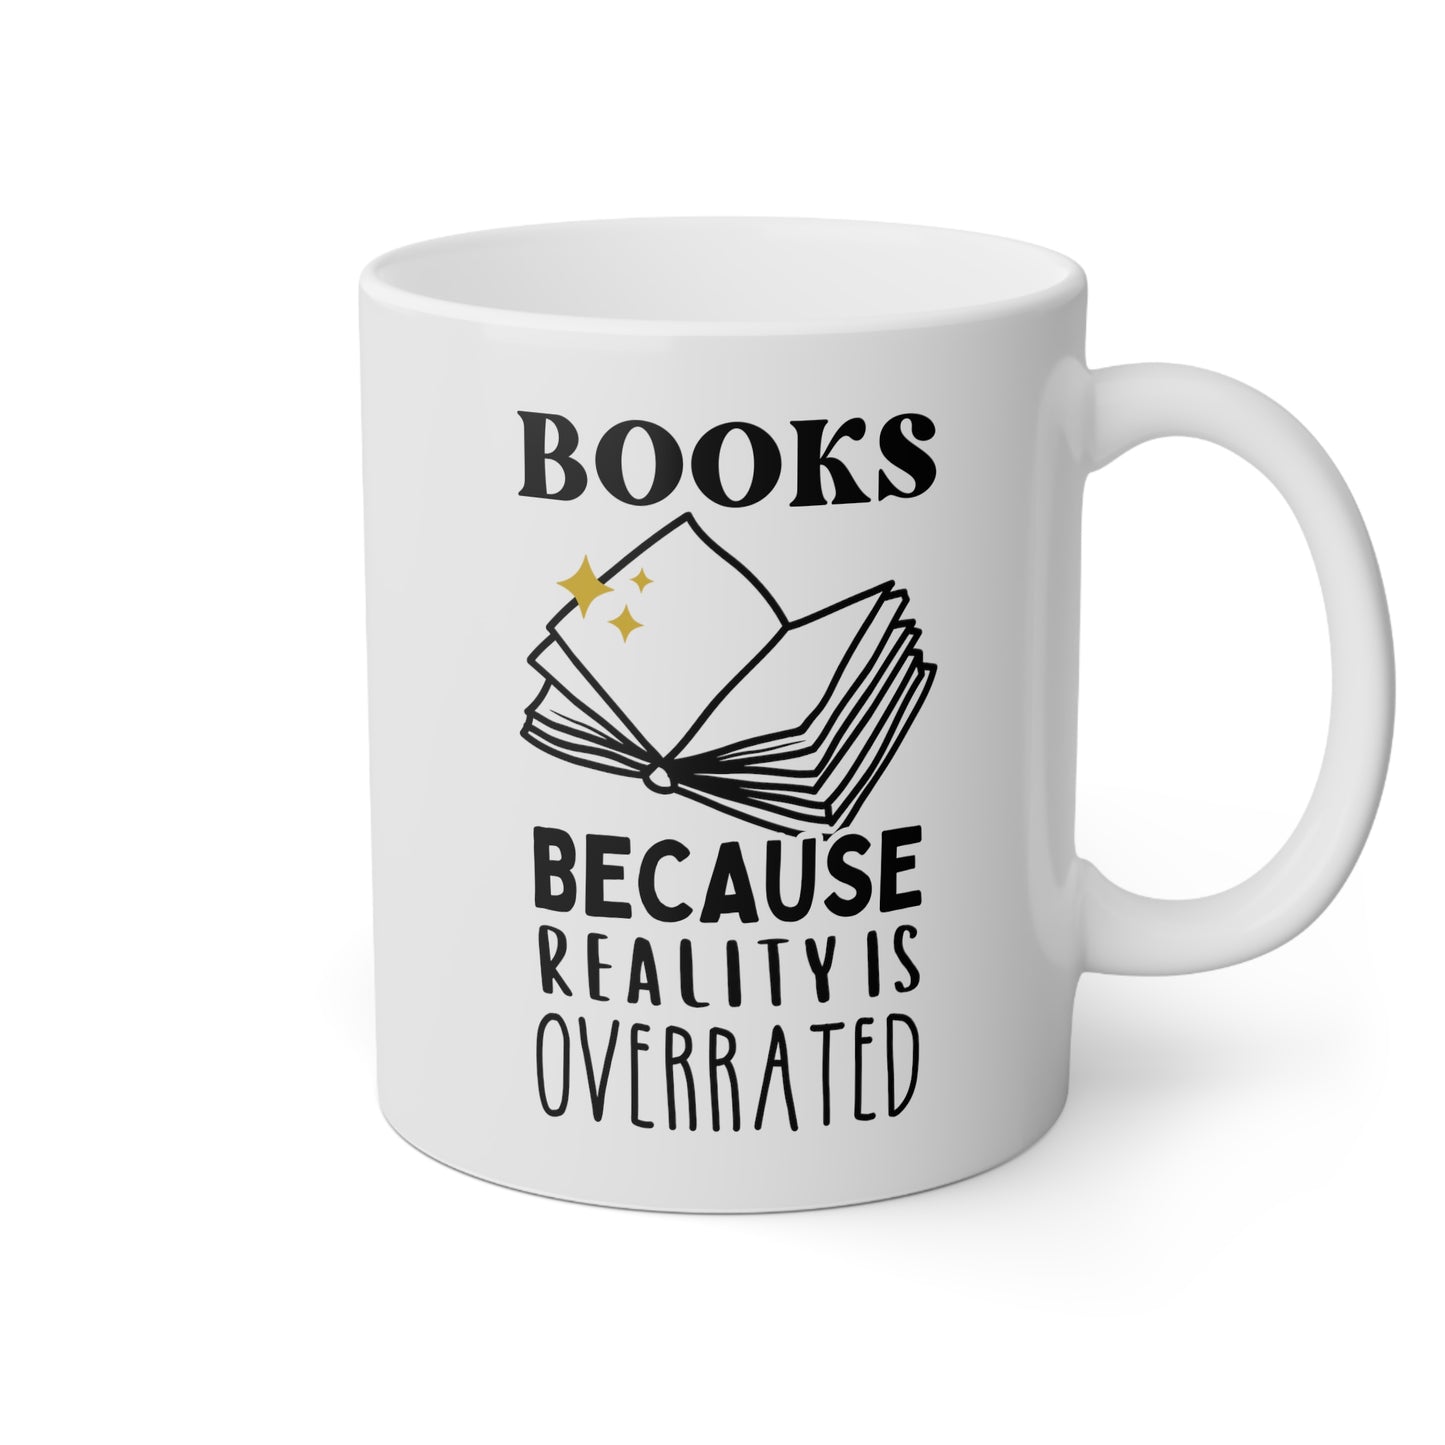 Books Because Reality Is Overrated 11oz white funny large coffee mug gift for her him book lover reading librarian teacher quote waveywares wavey wares wavywares wavy wares